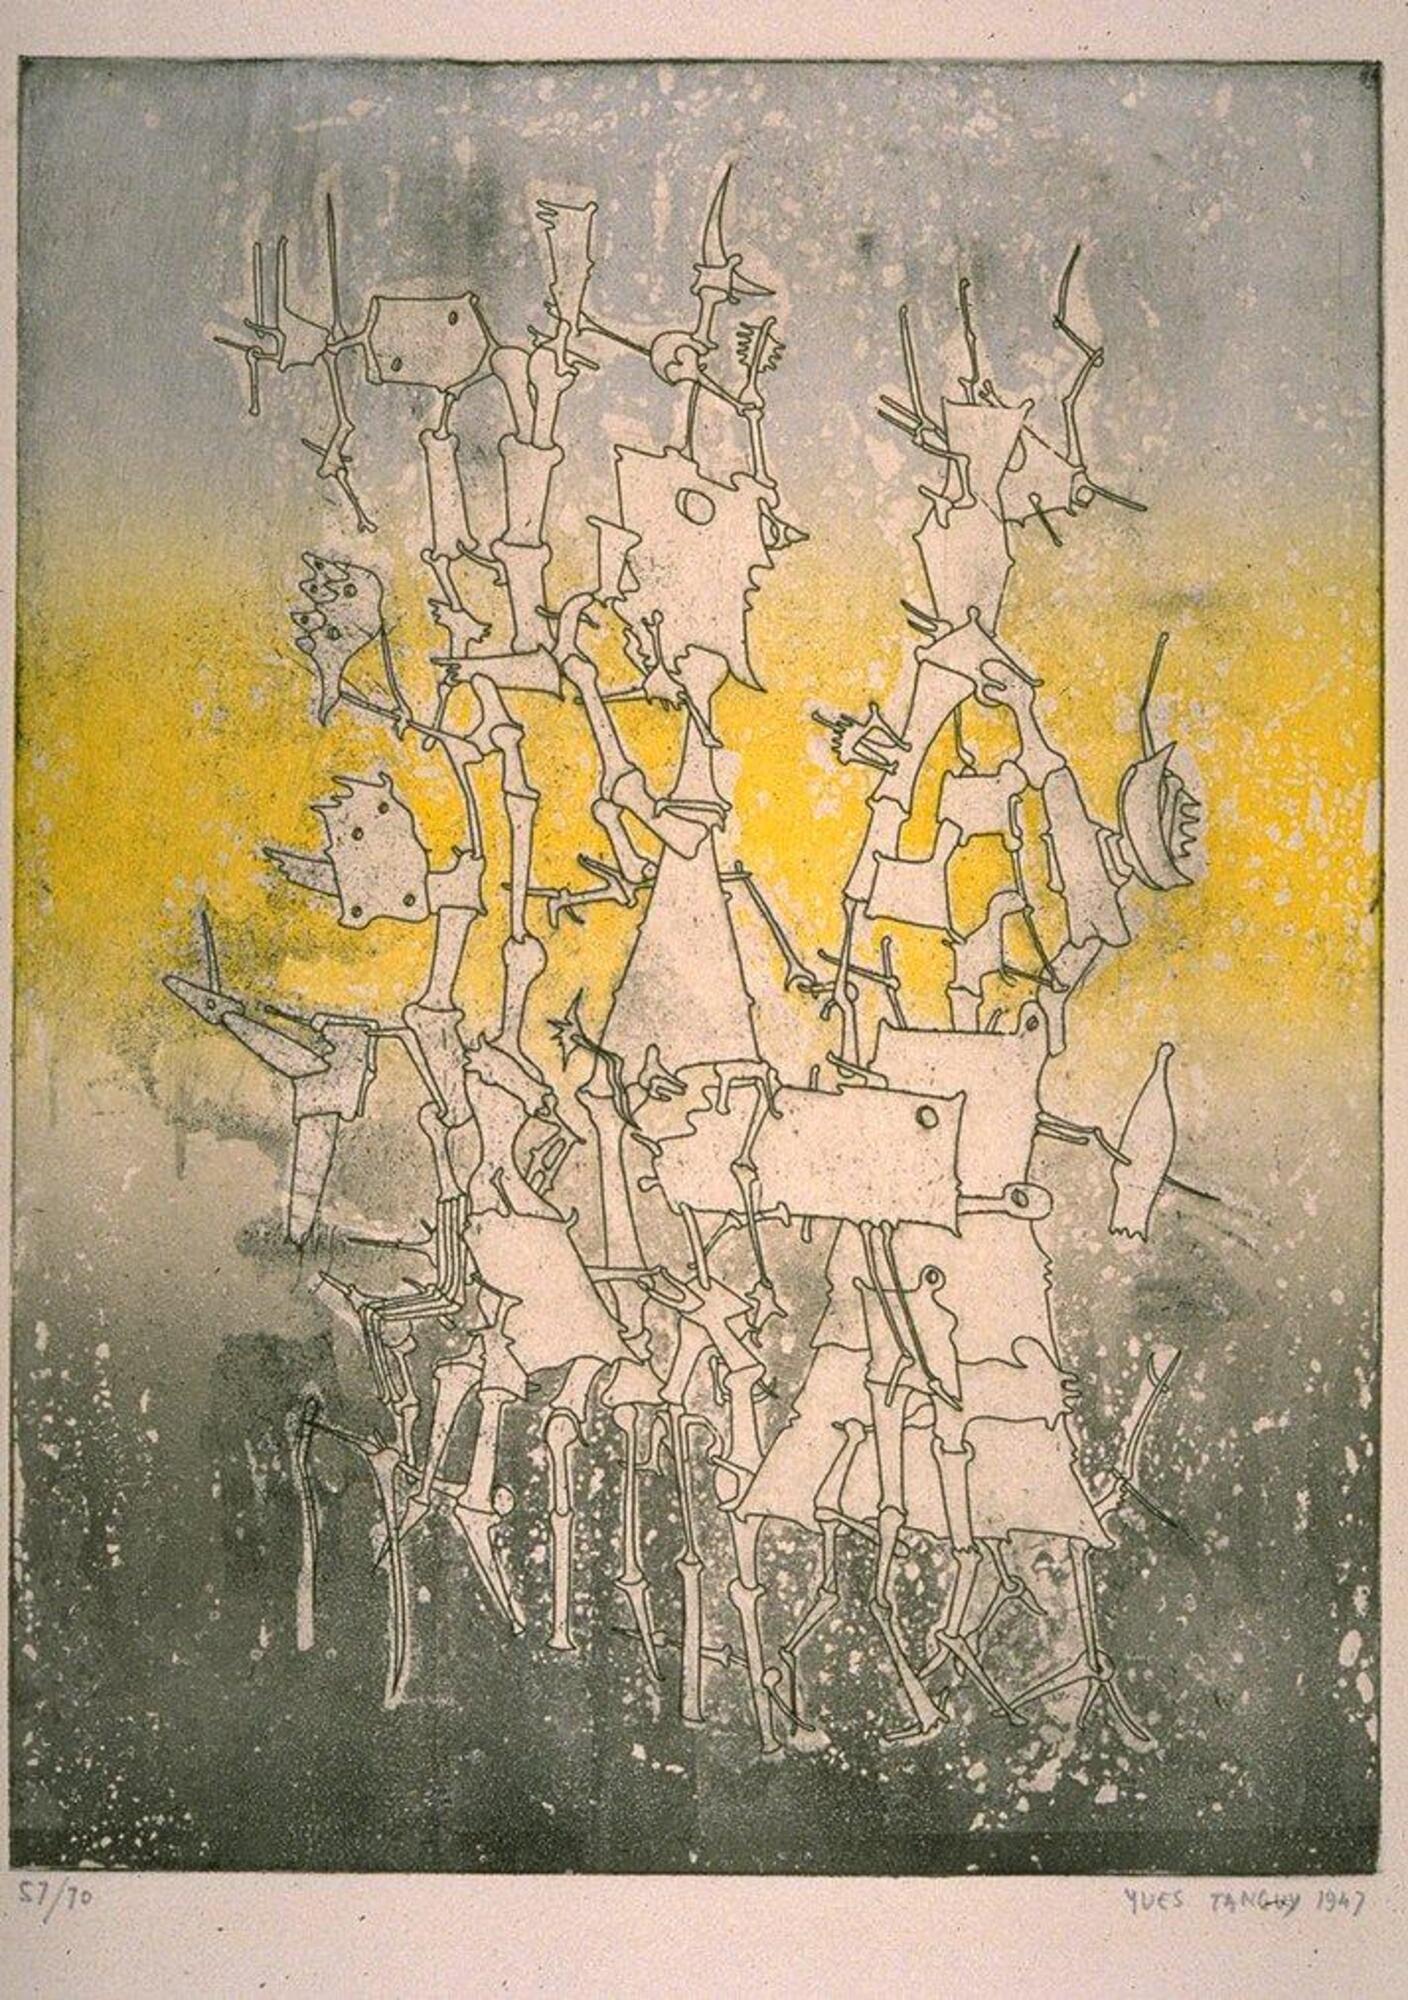 At the center of the print is a series of abstract bone-like shapes put together to resemble a creature or creatures. The background is colored, top to bottom, in blue, yellow, and green. The print is signed and dated (l.r.) "Yves Tanguy 1947" and numbered (l.l.) "57/70" in pencil.